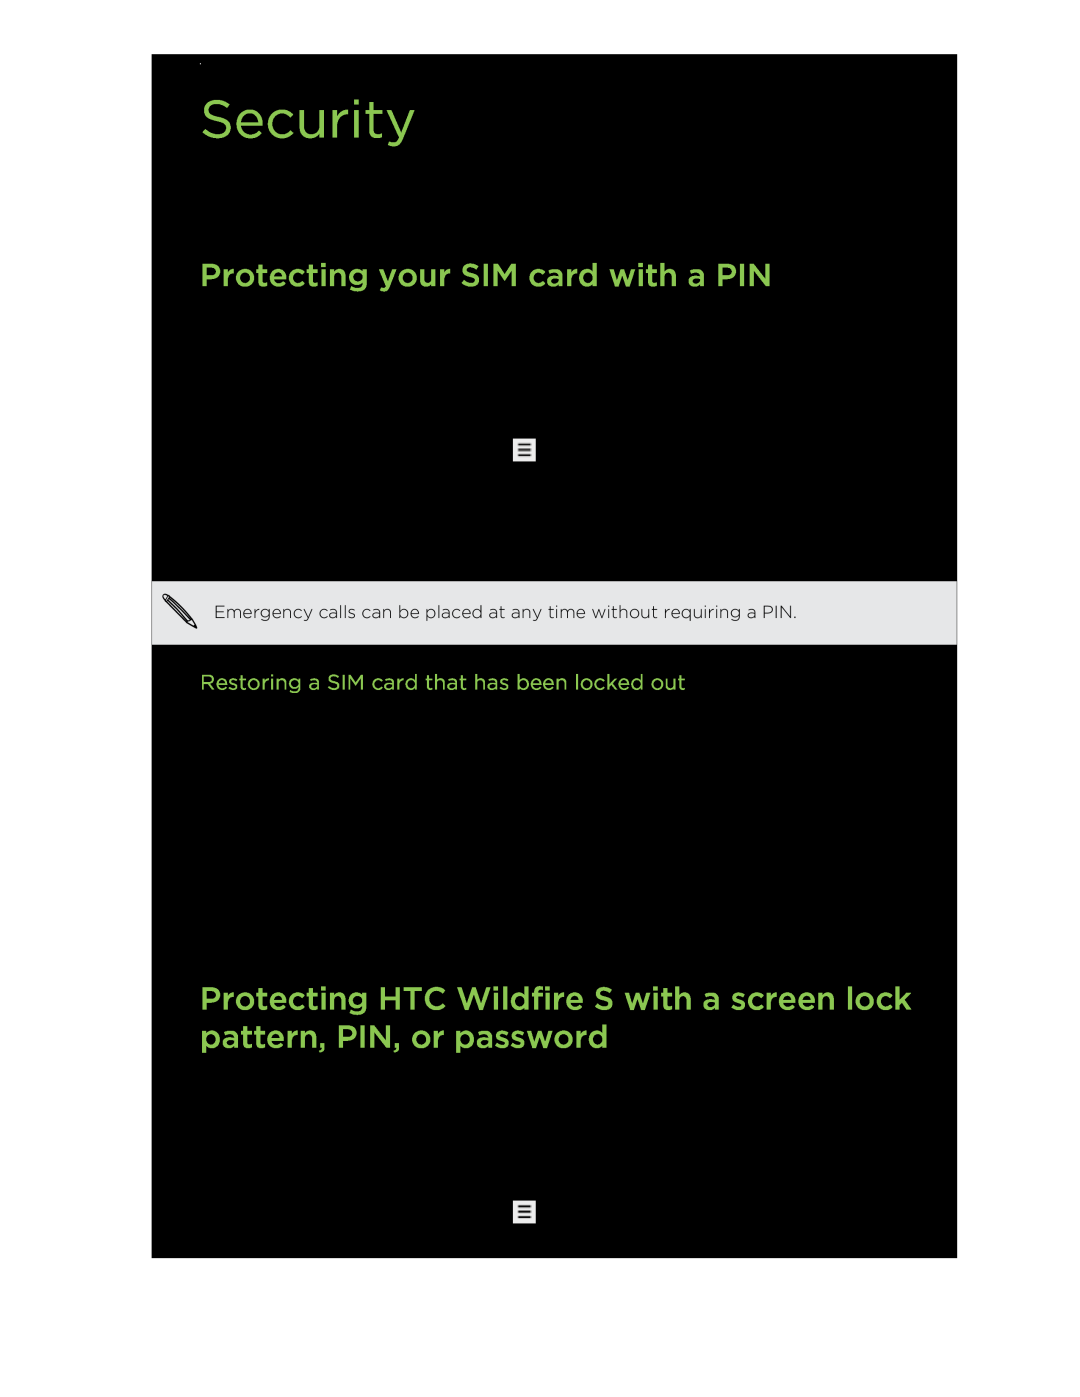 HTC manual Security, Protecting your SIM card with a PIN, Restoring a SIM card that has been locked out 